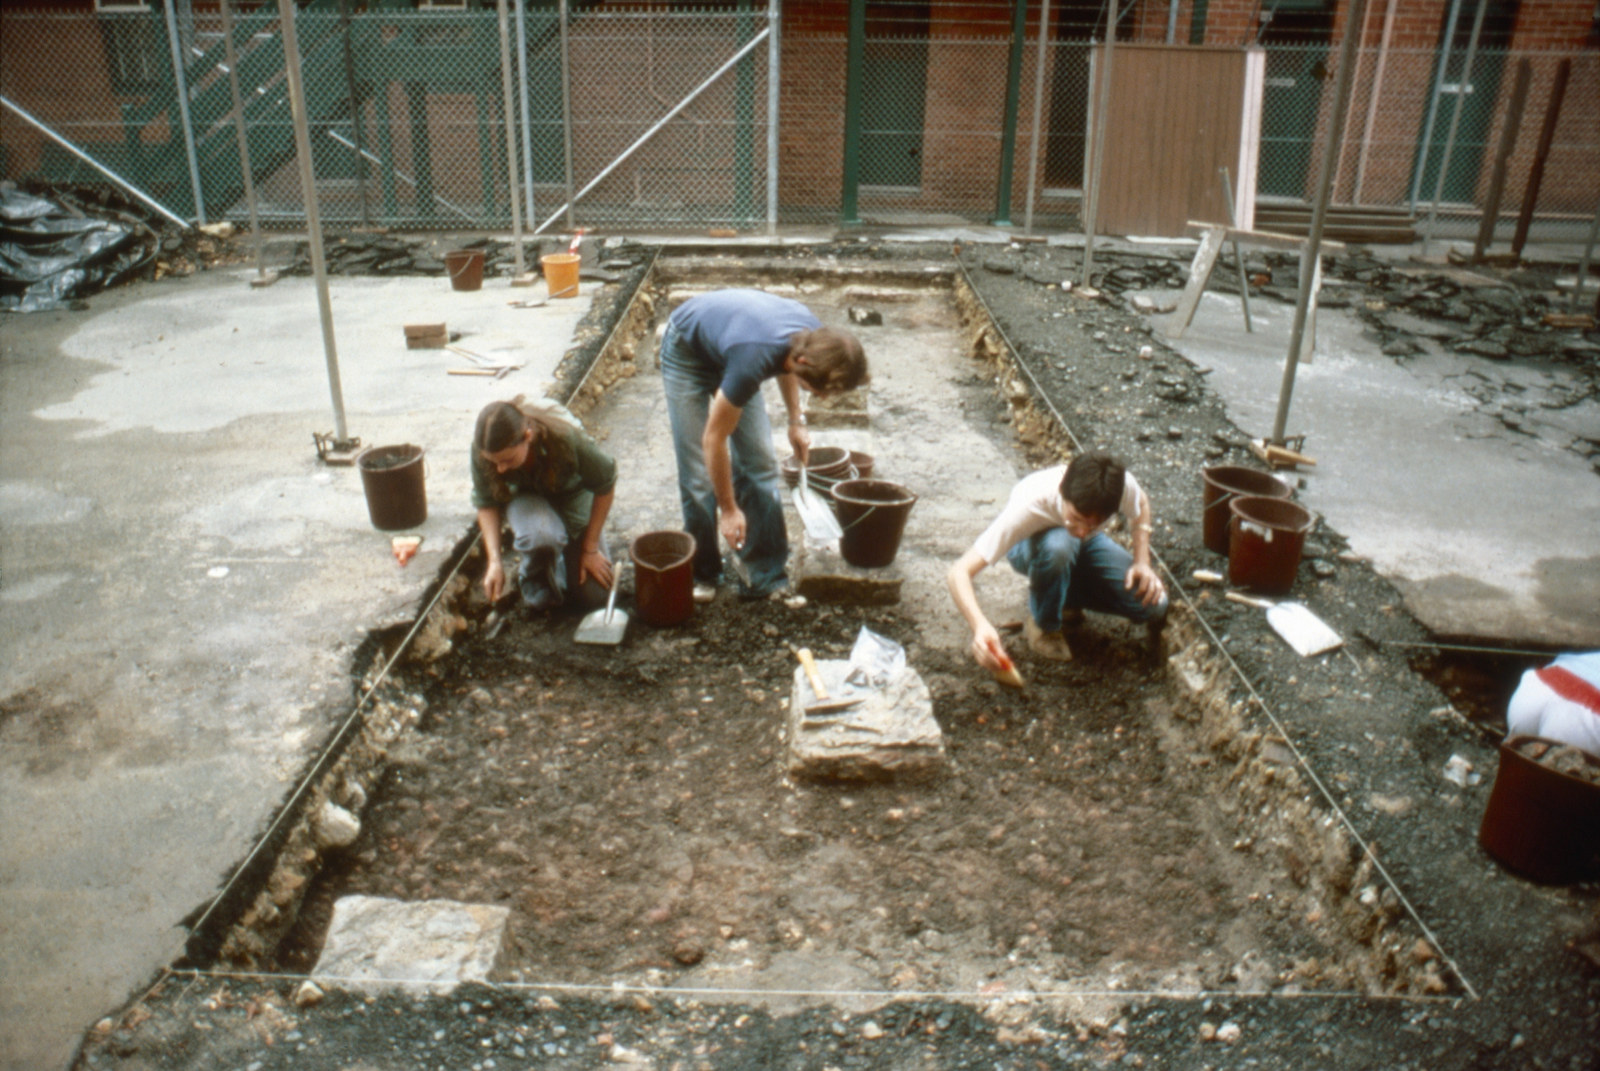 Archaeologists excavating a trench outside the eastern door of Hyde Park Barracks, 1981. From left: Wendy Thorp, Grahame Wilson, Robert Varman.